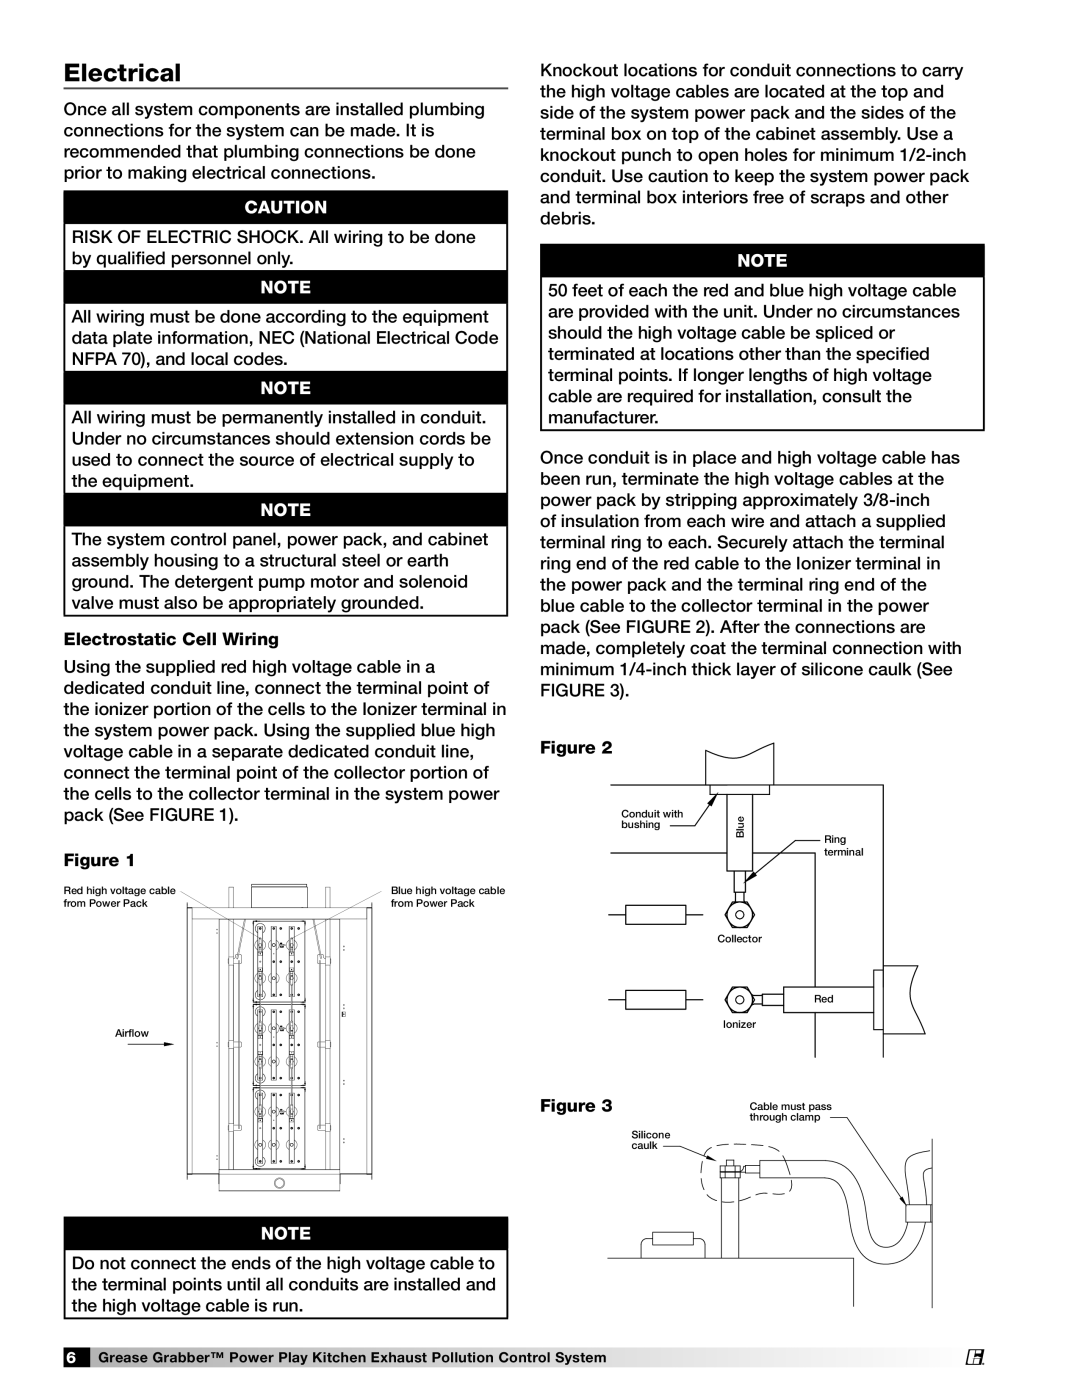 Greenheck Fan 474754 installation manual Electrical, Electrostatic Cell Wiring 